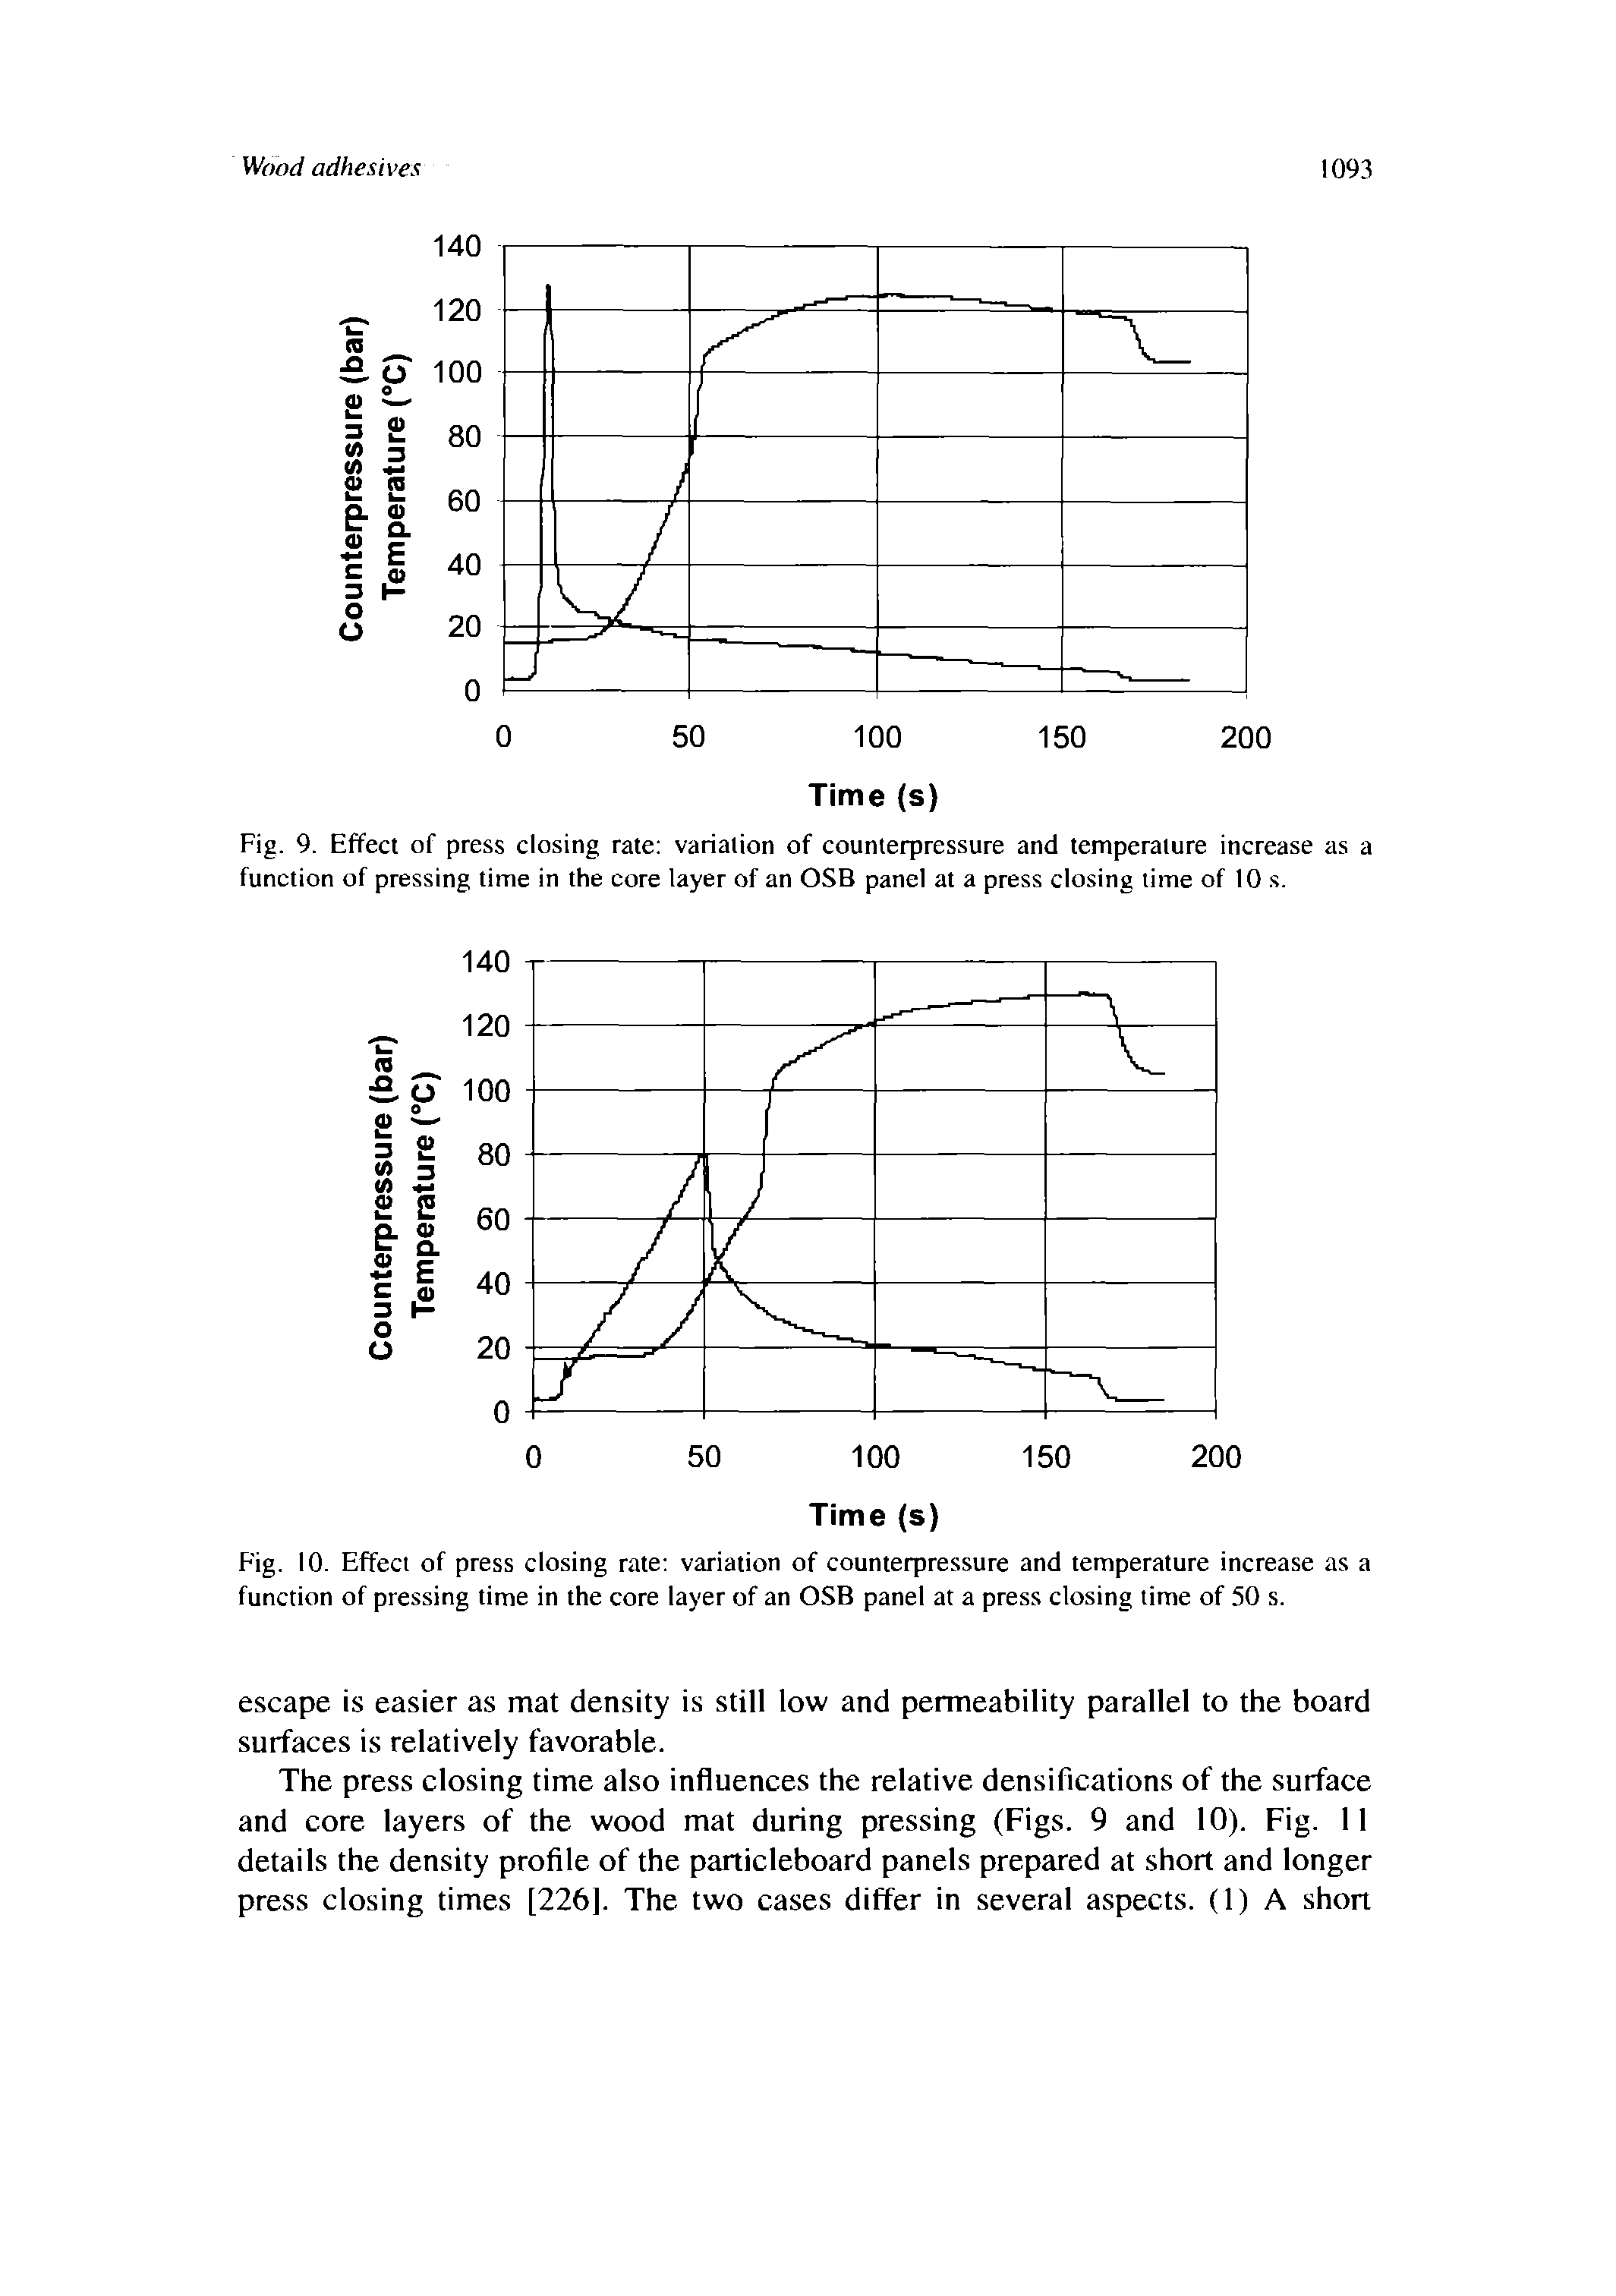 Fig. 10. Effect of press closing rate variation of counterpressure and temperature increase as a function of pressing time in the core layer of an OSB panel at a press closing time of 50 s.